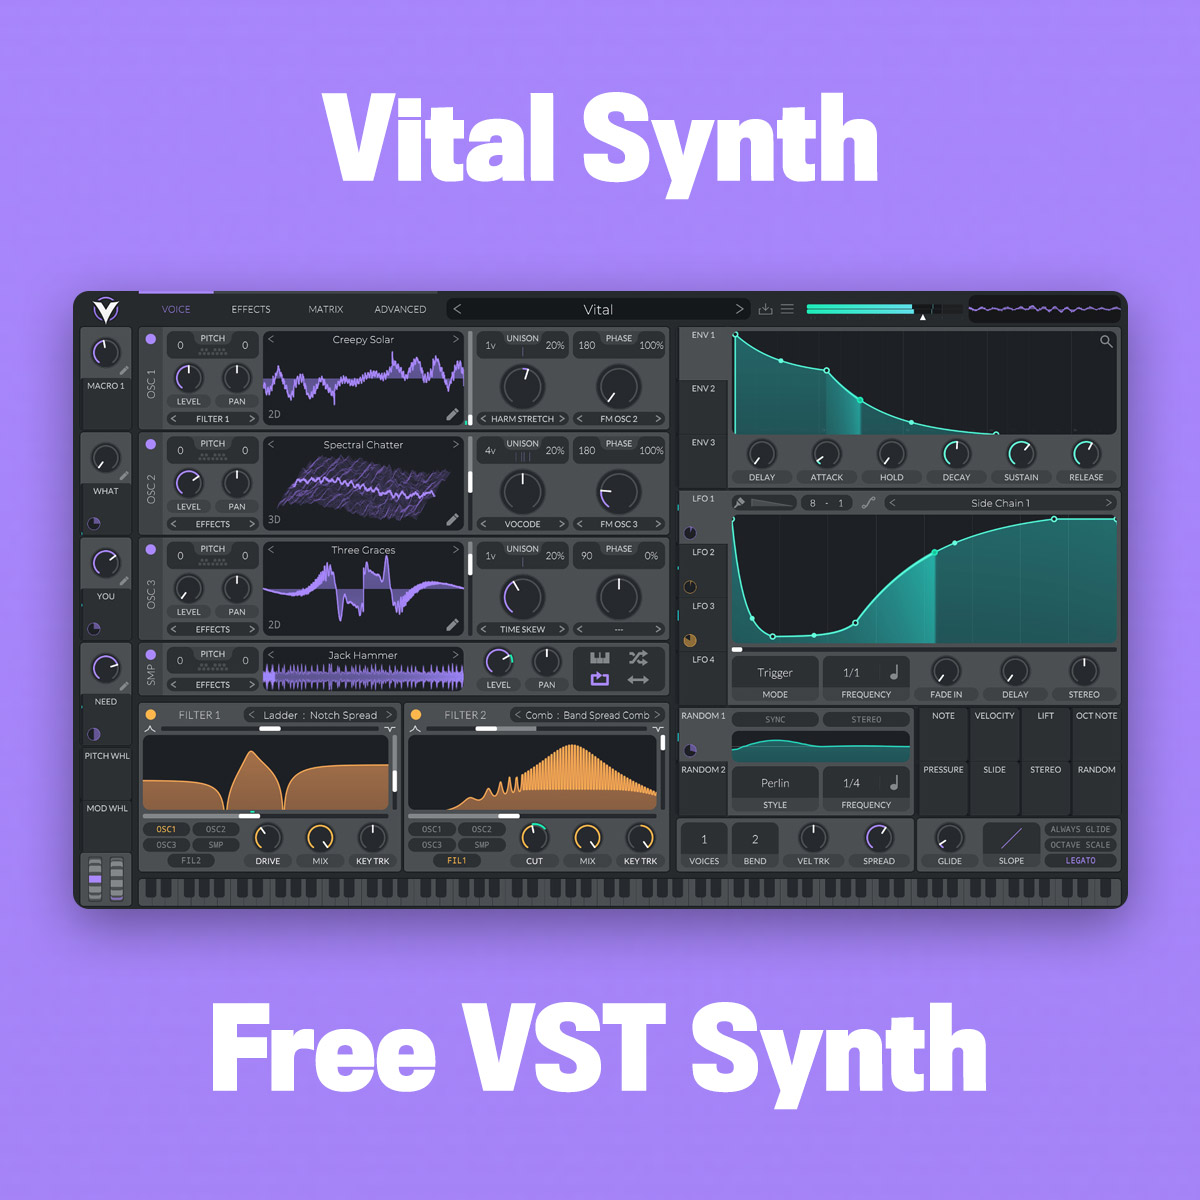 Vital Synth – Free VST Synth for Trap Producers